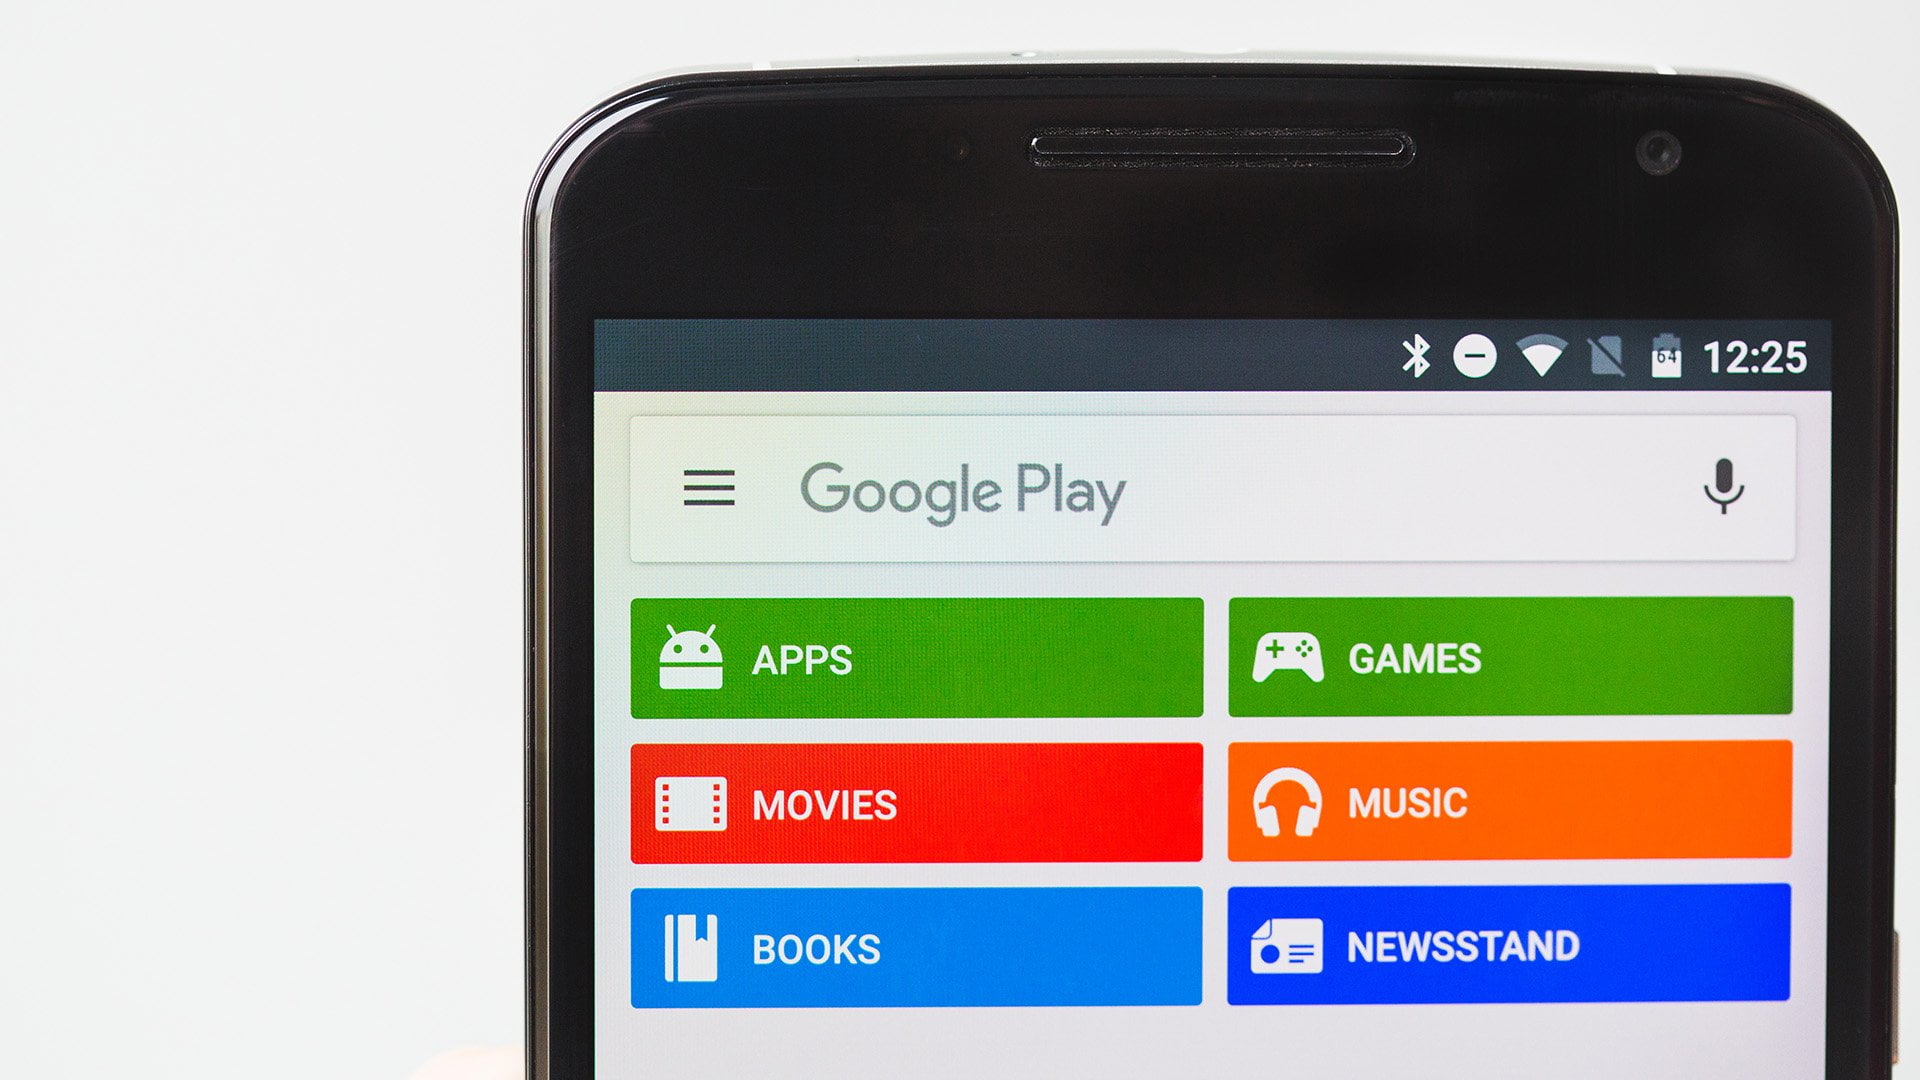 How to create a family library on Google Play?